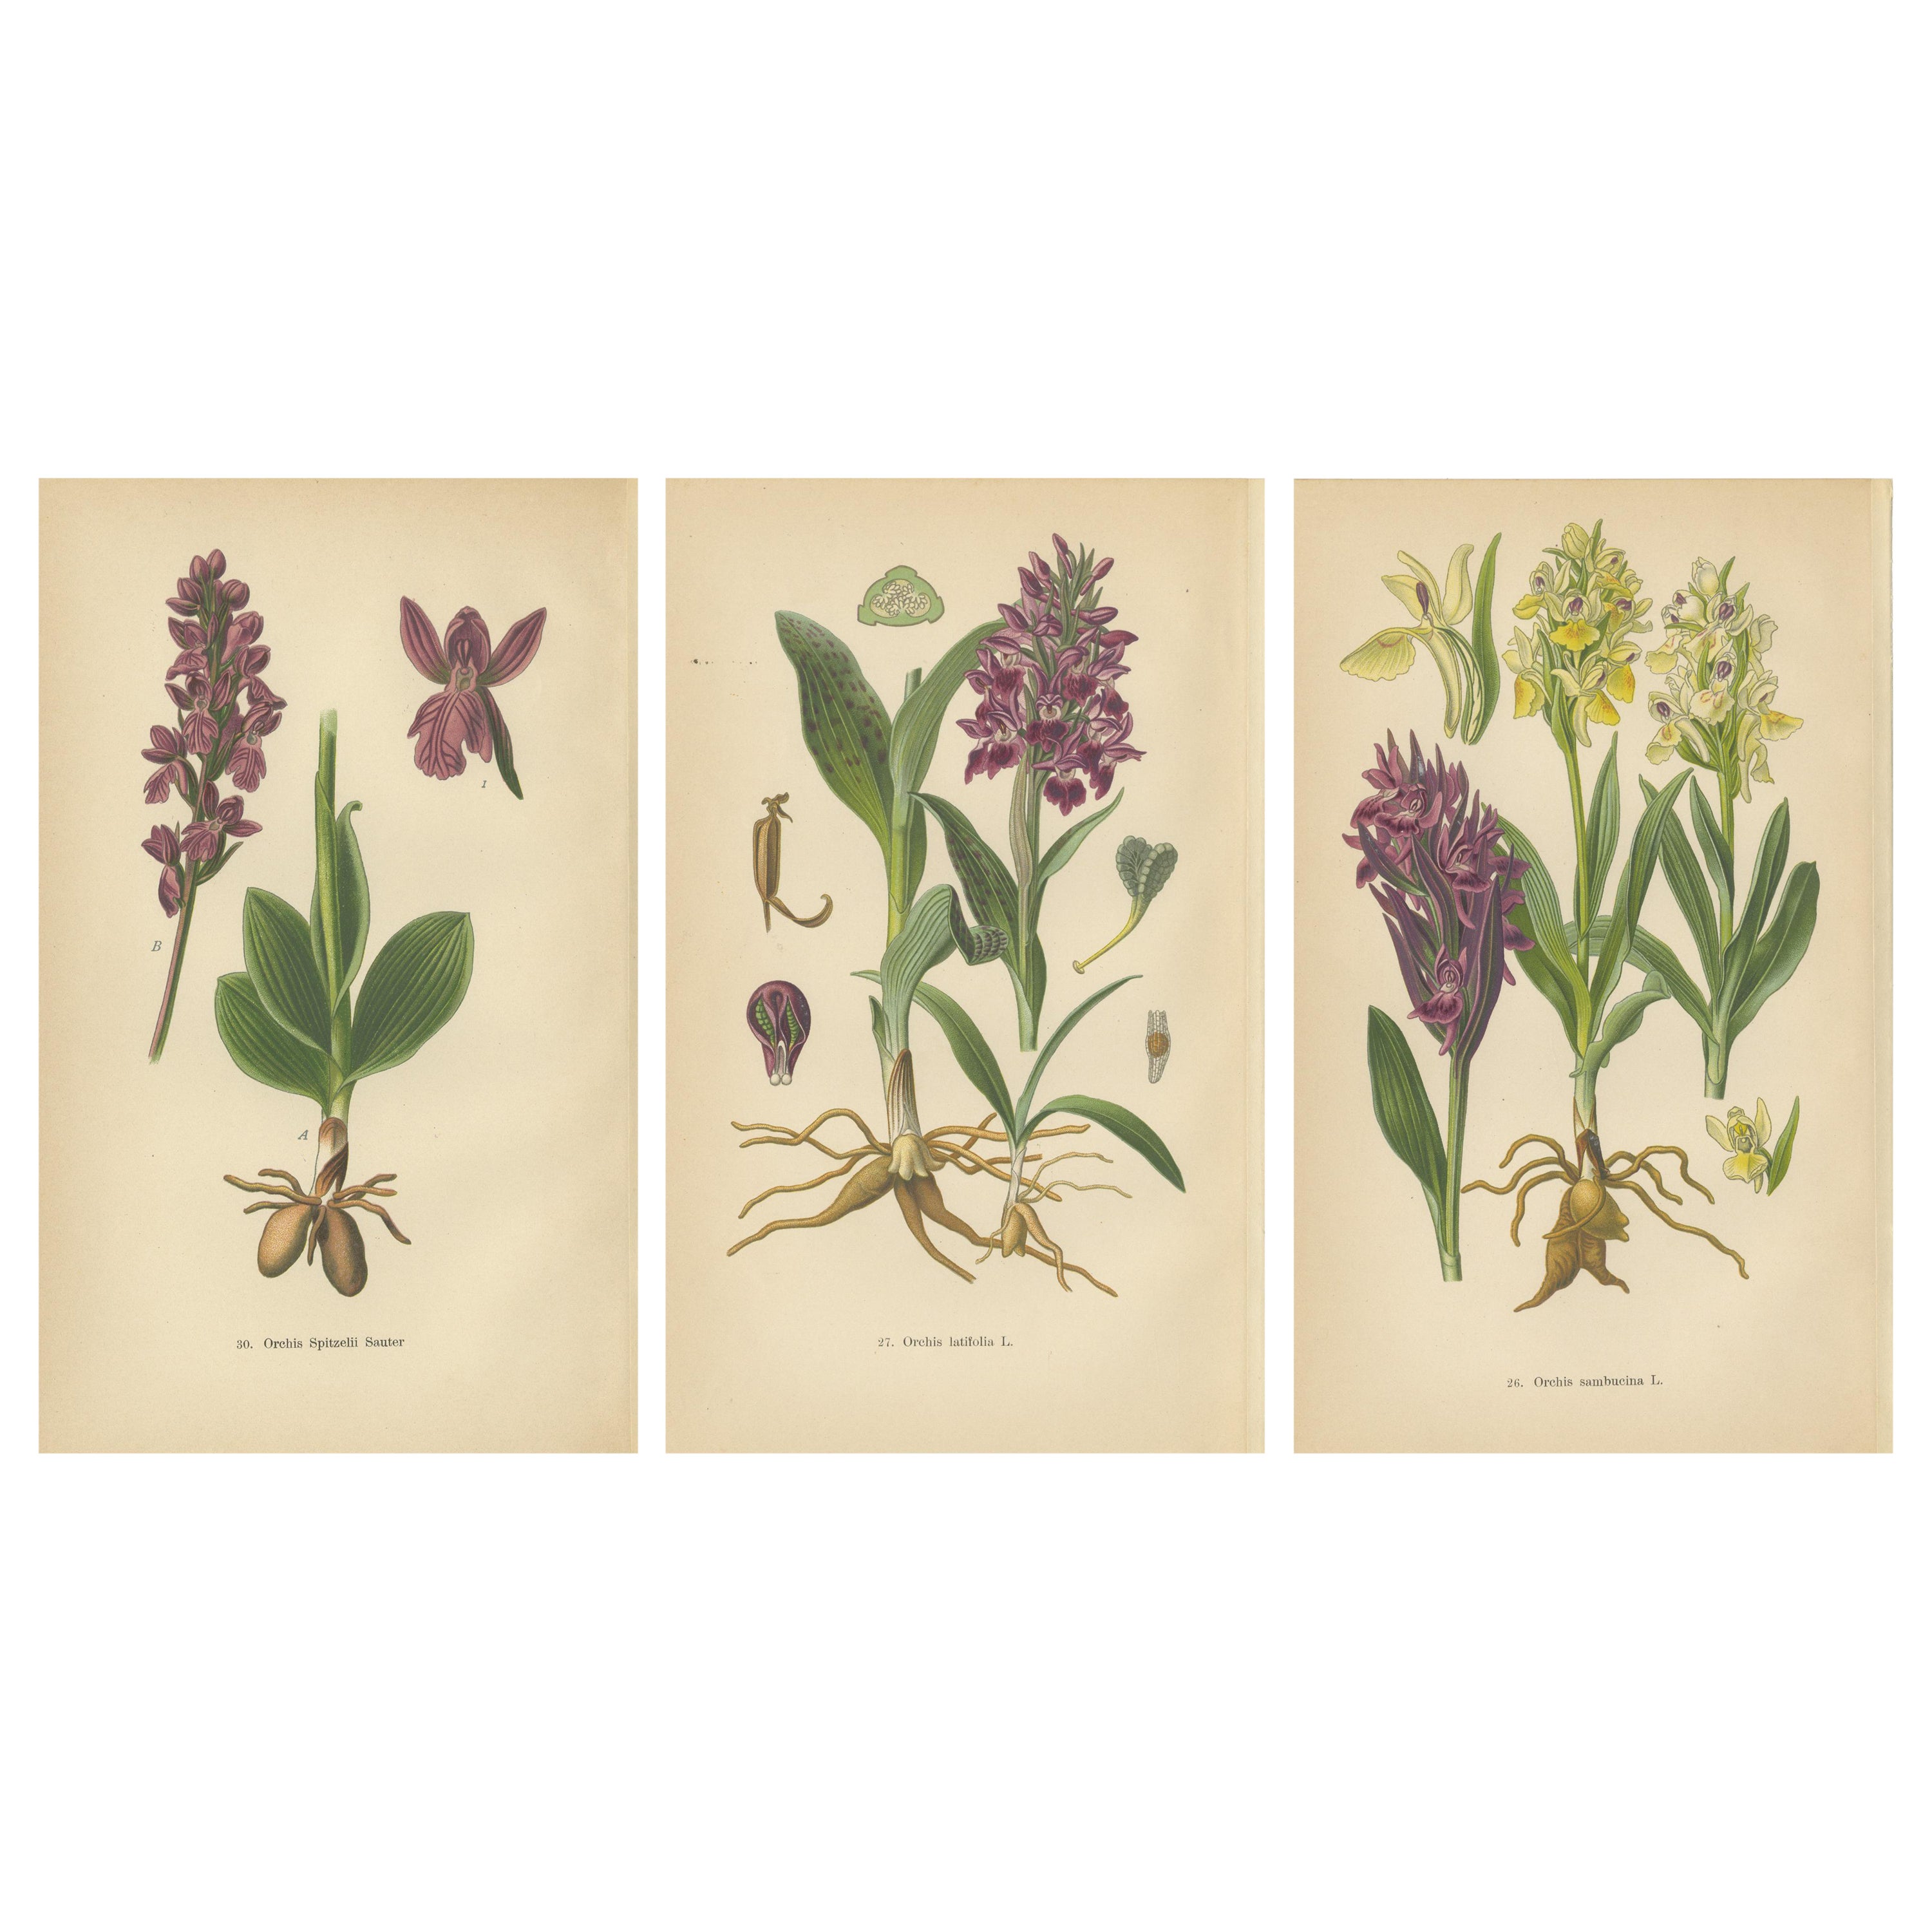 Varieties of Elegance: Portraits of Orchids in 1904 Botanical Study